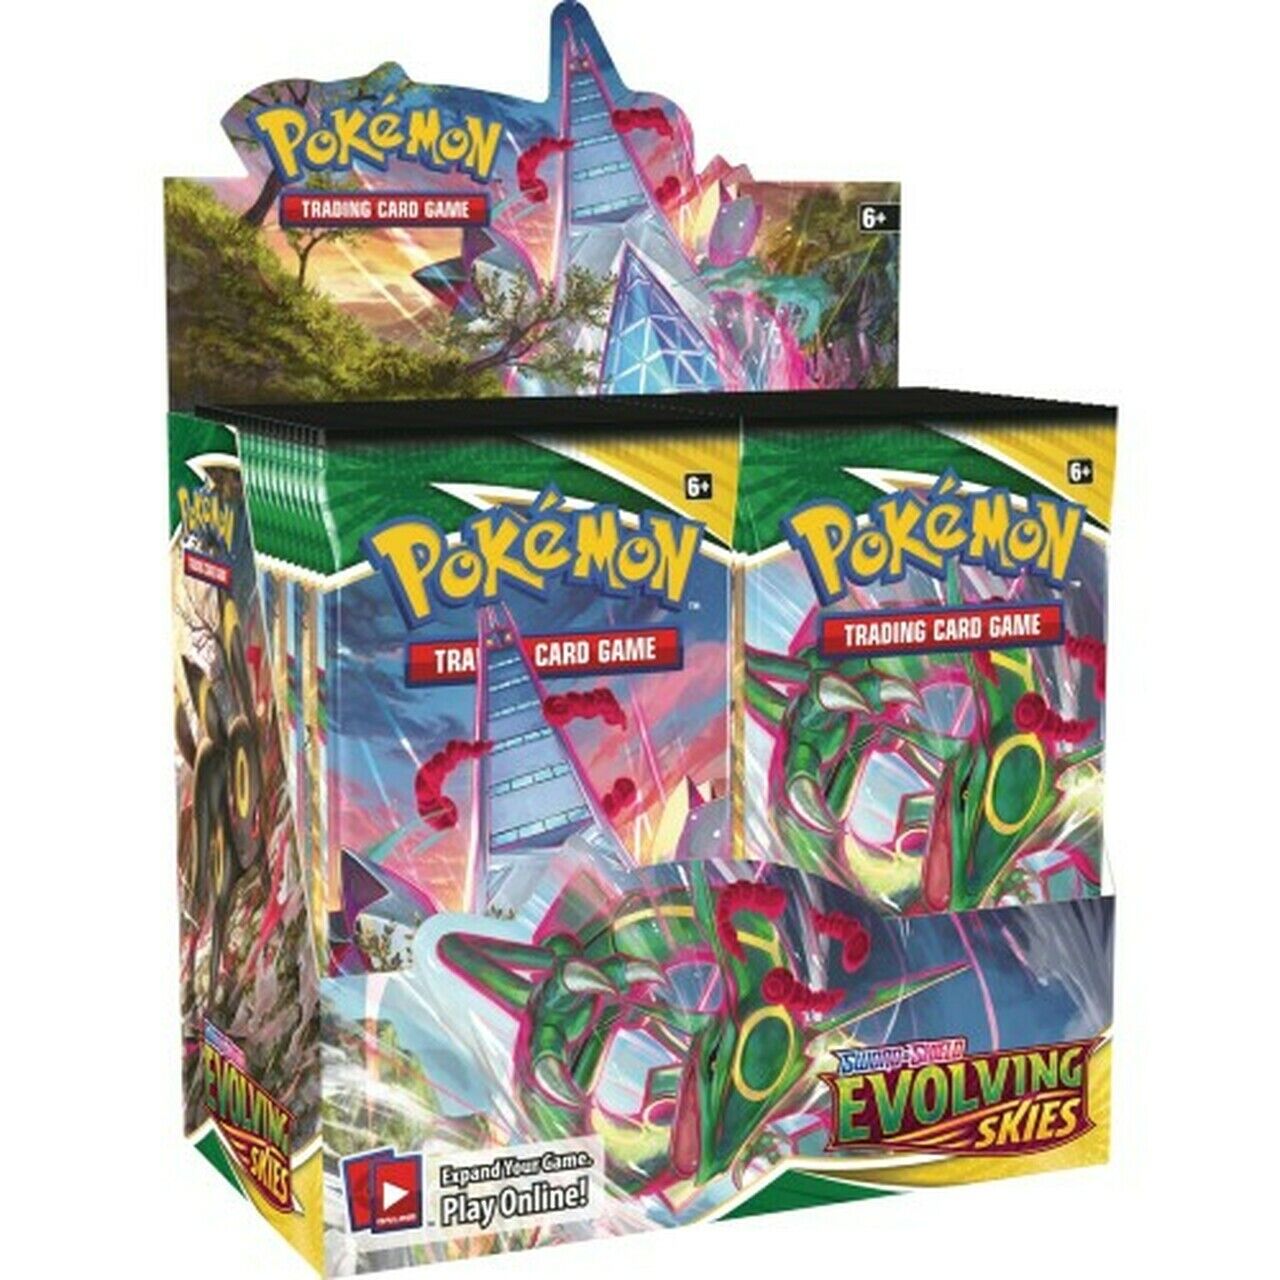 10 EVOLVING SKIES Booster Pack Lot - Sealed From Box Pokemon Cards Без бренда